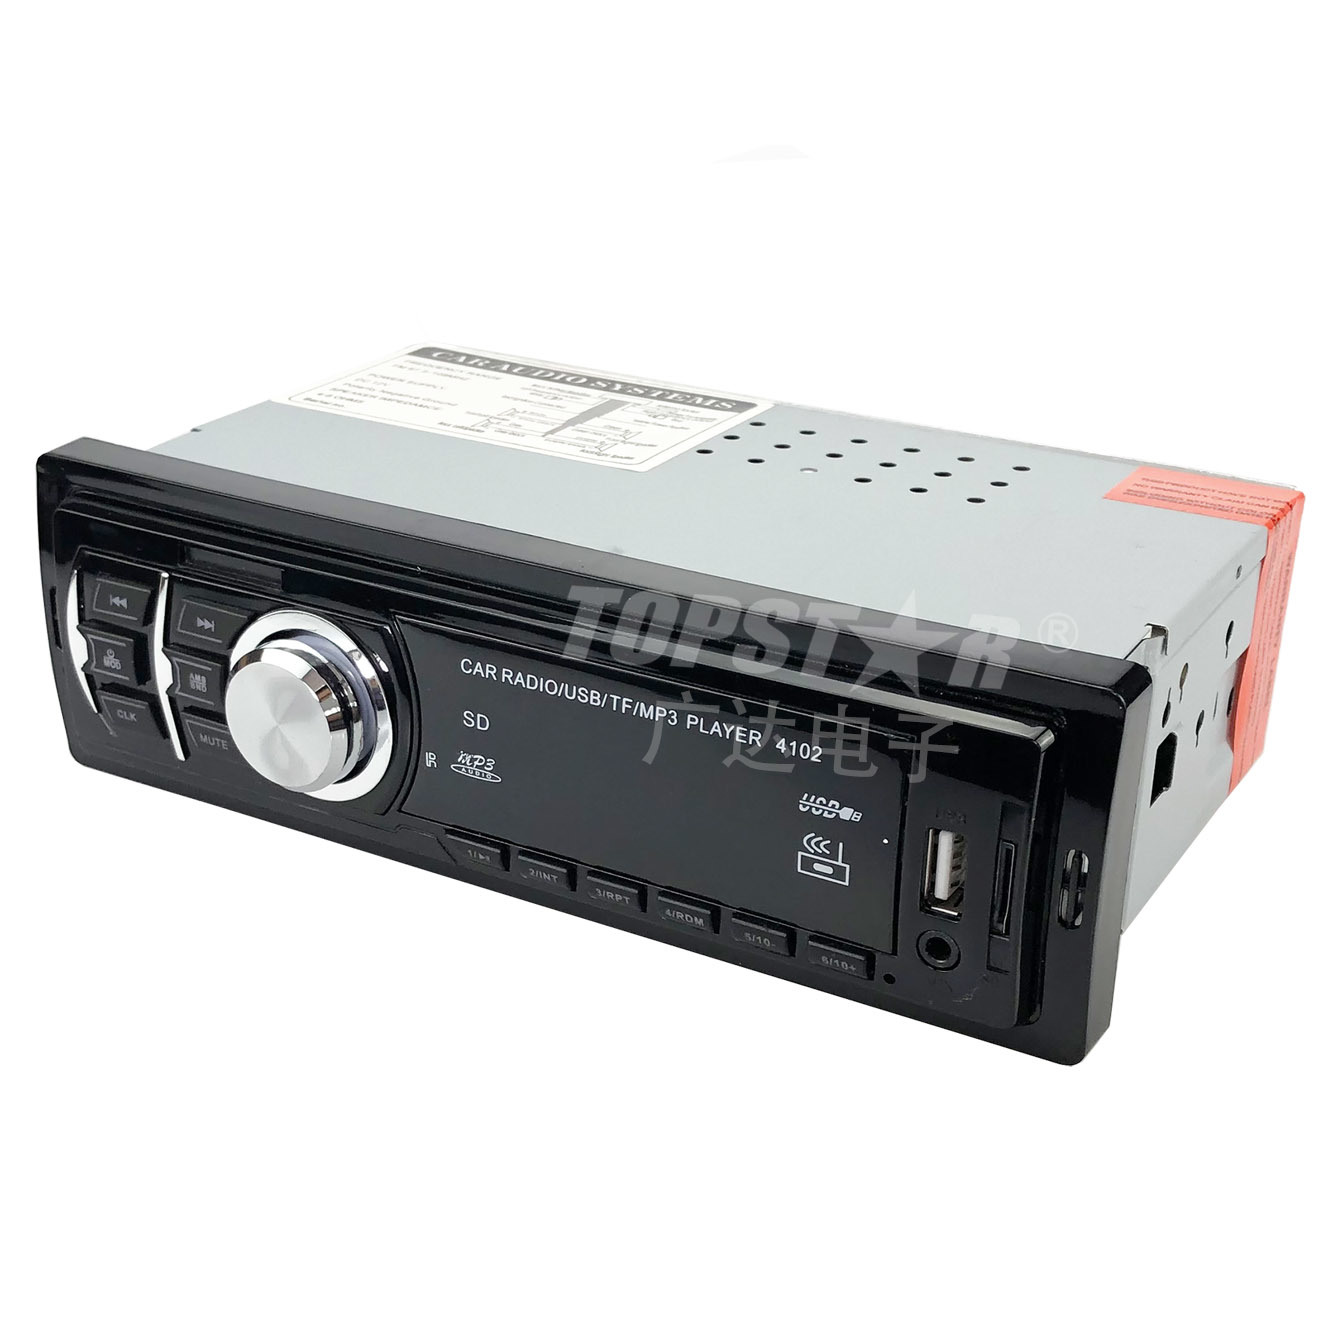 MP3 on Car MP3 Player for Car Stereo Car Video Player Fixed Panel Car MP3 Audio Digital Media Receiver